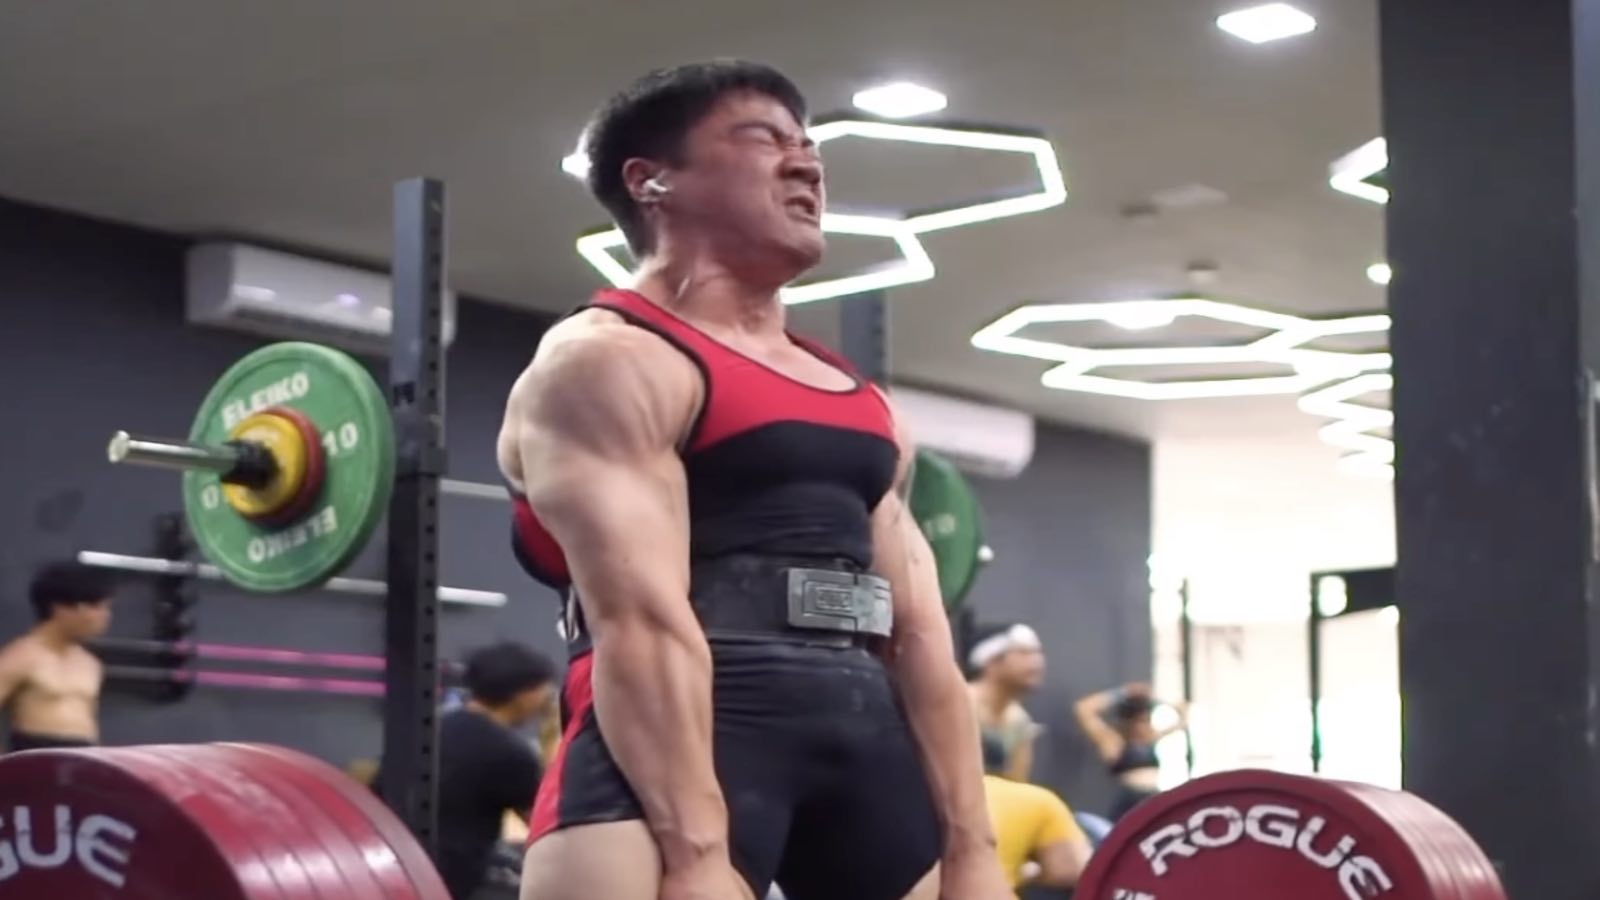 powerlifter-kasemsand-senumong-(66kg)-deadlifts-320-kilograms-(705-pounds)-for-huge-pr-and-unofficial-world-record-–-breaking-muscle